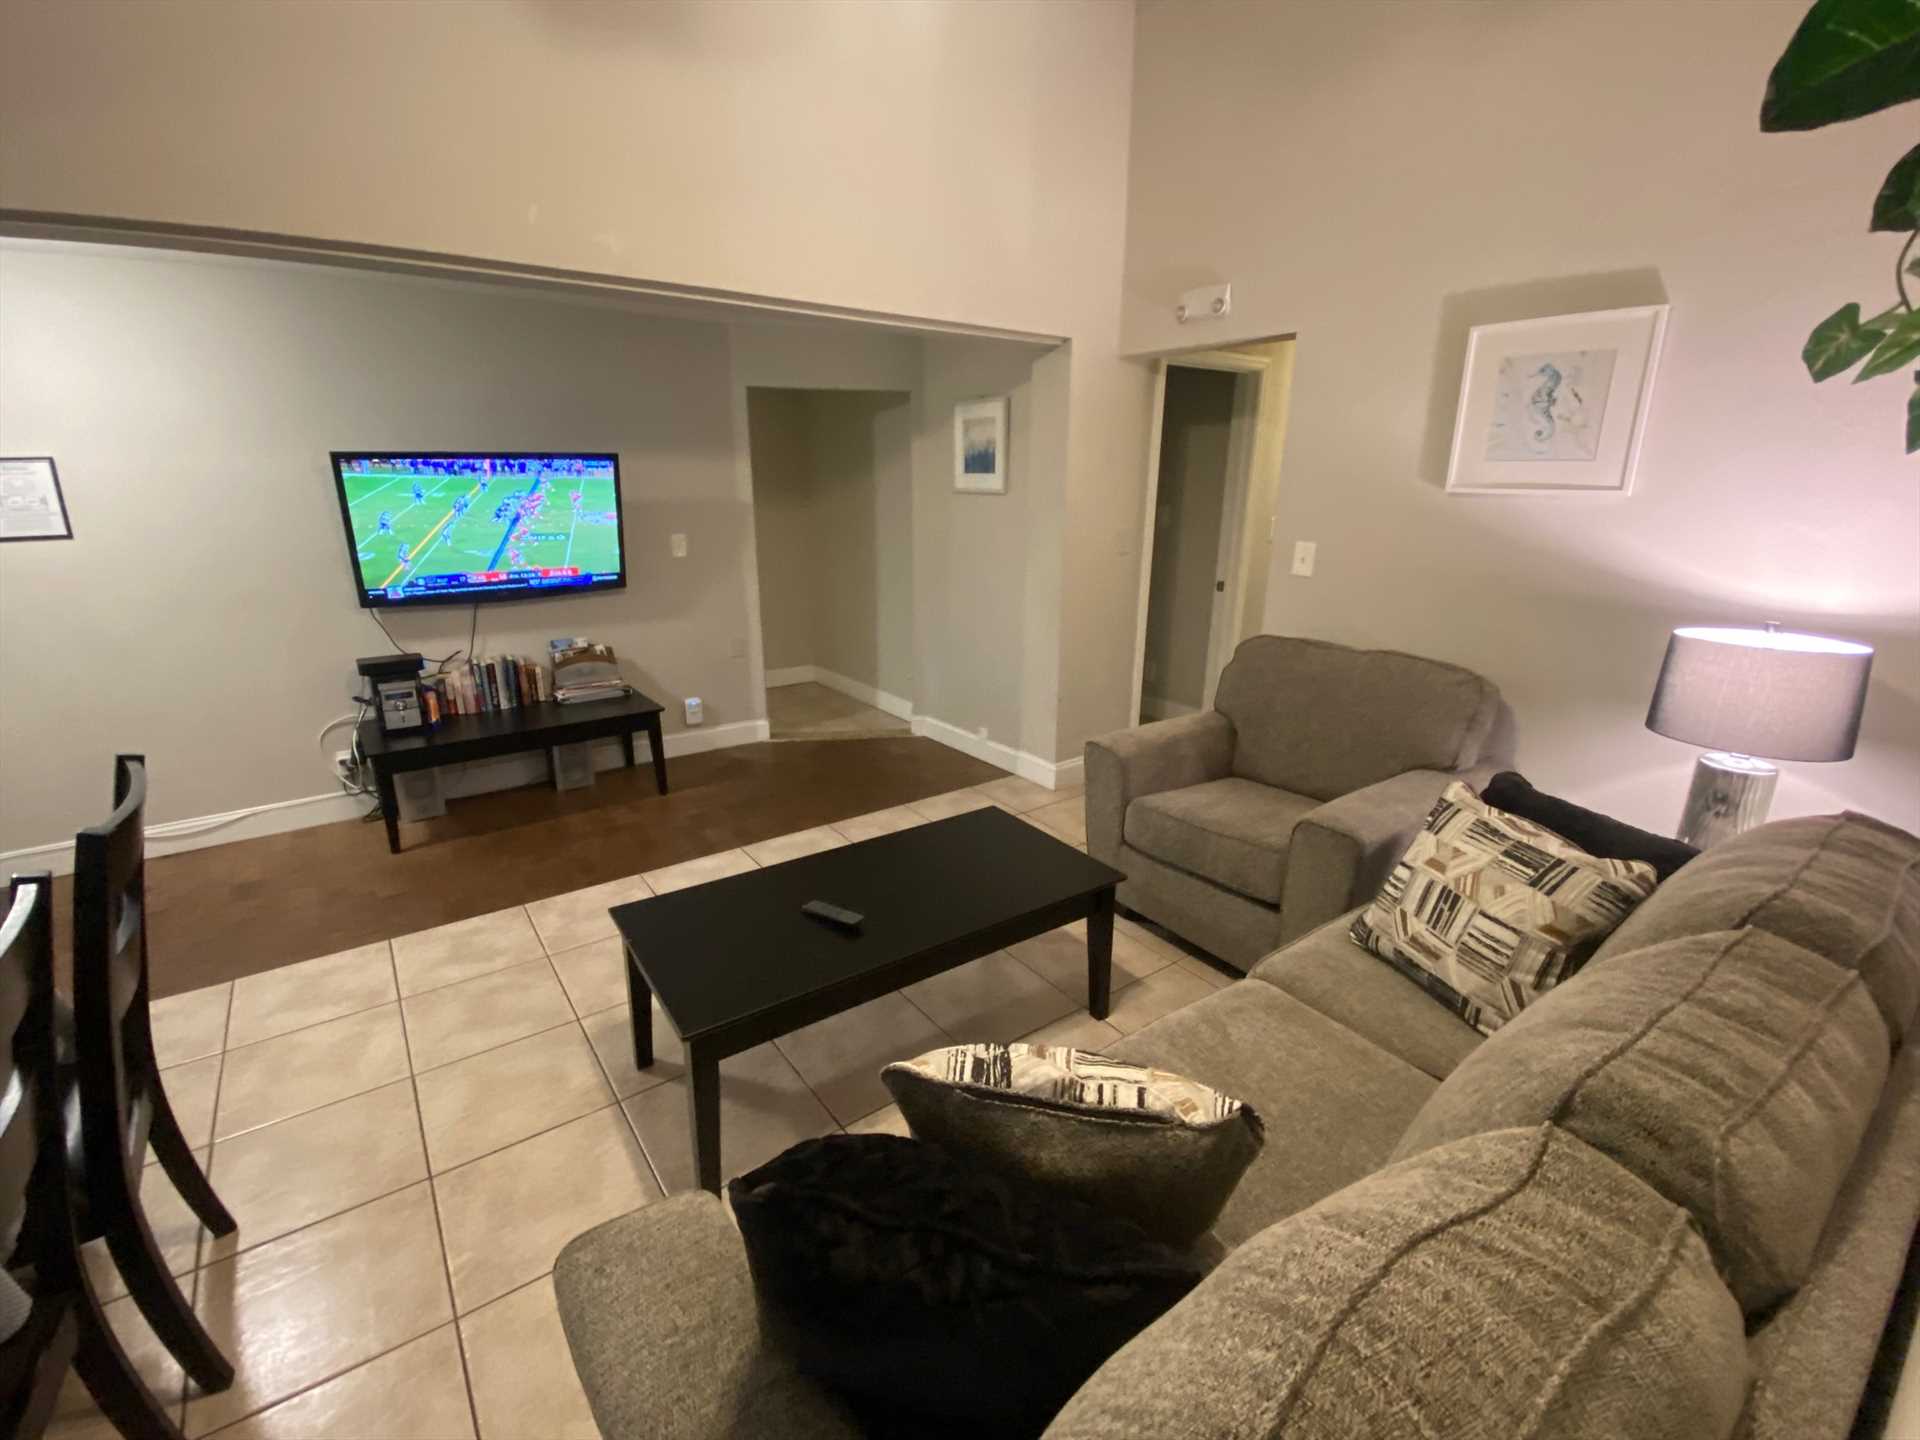 Living room has wall mounted HDTV and WIFI.